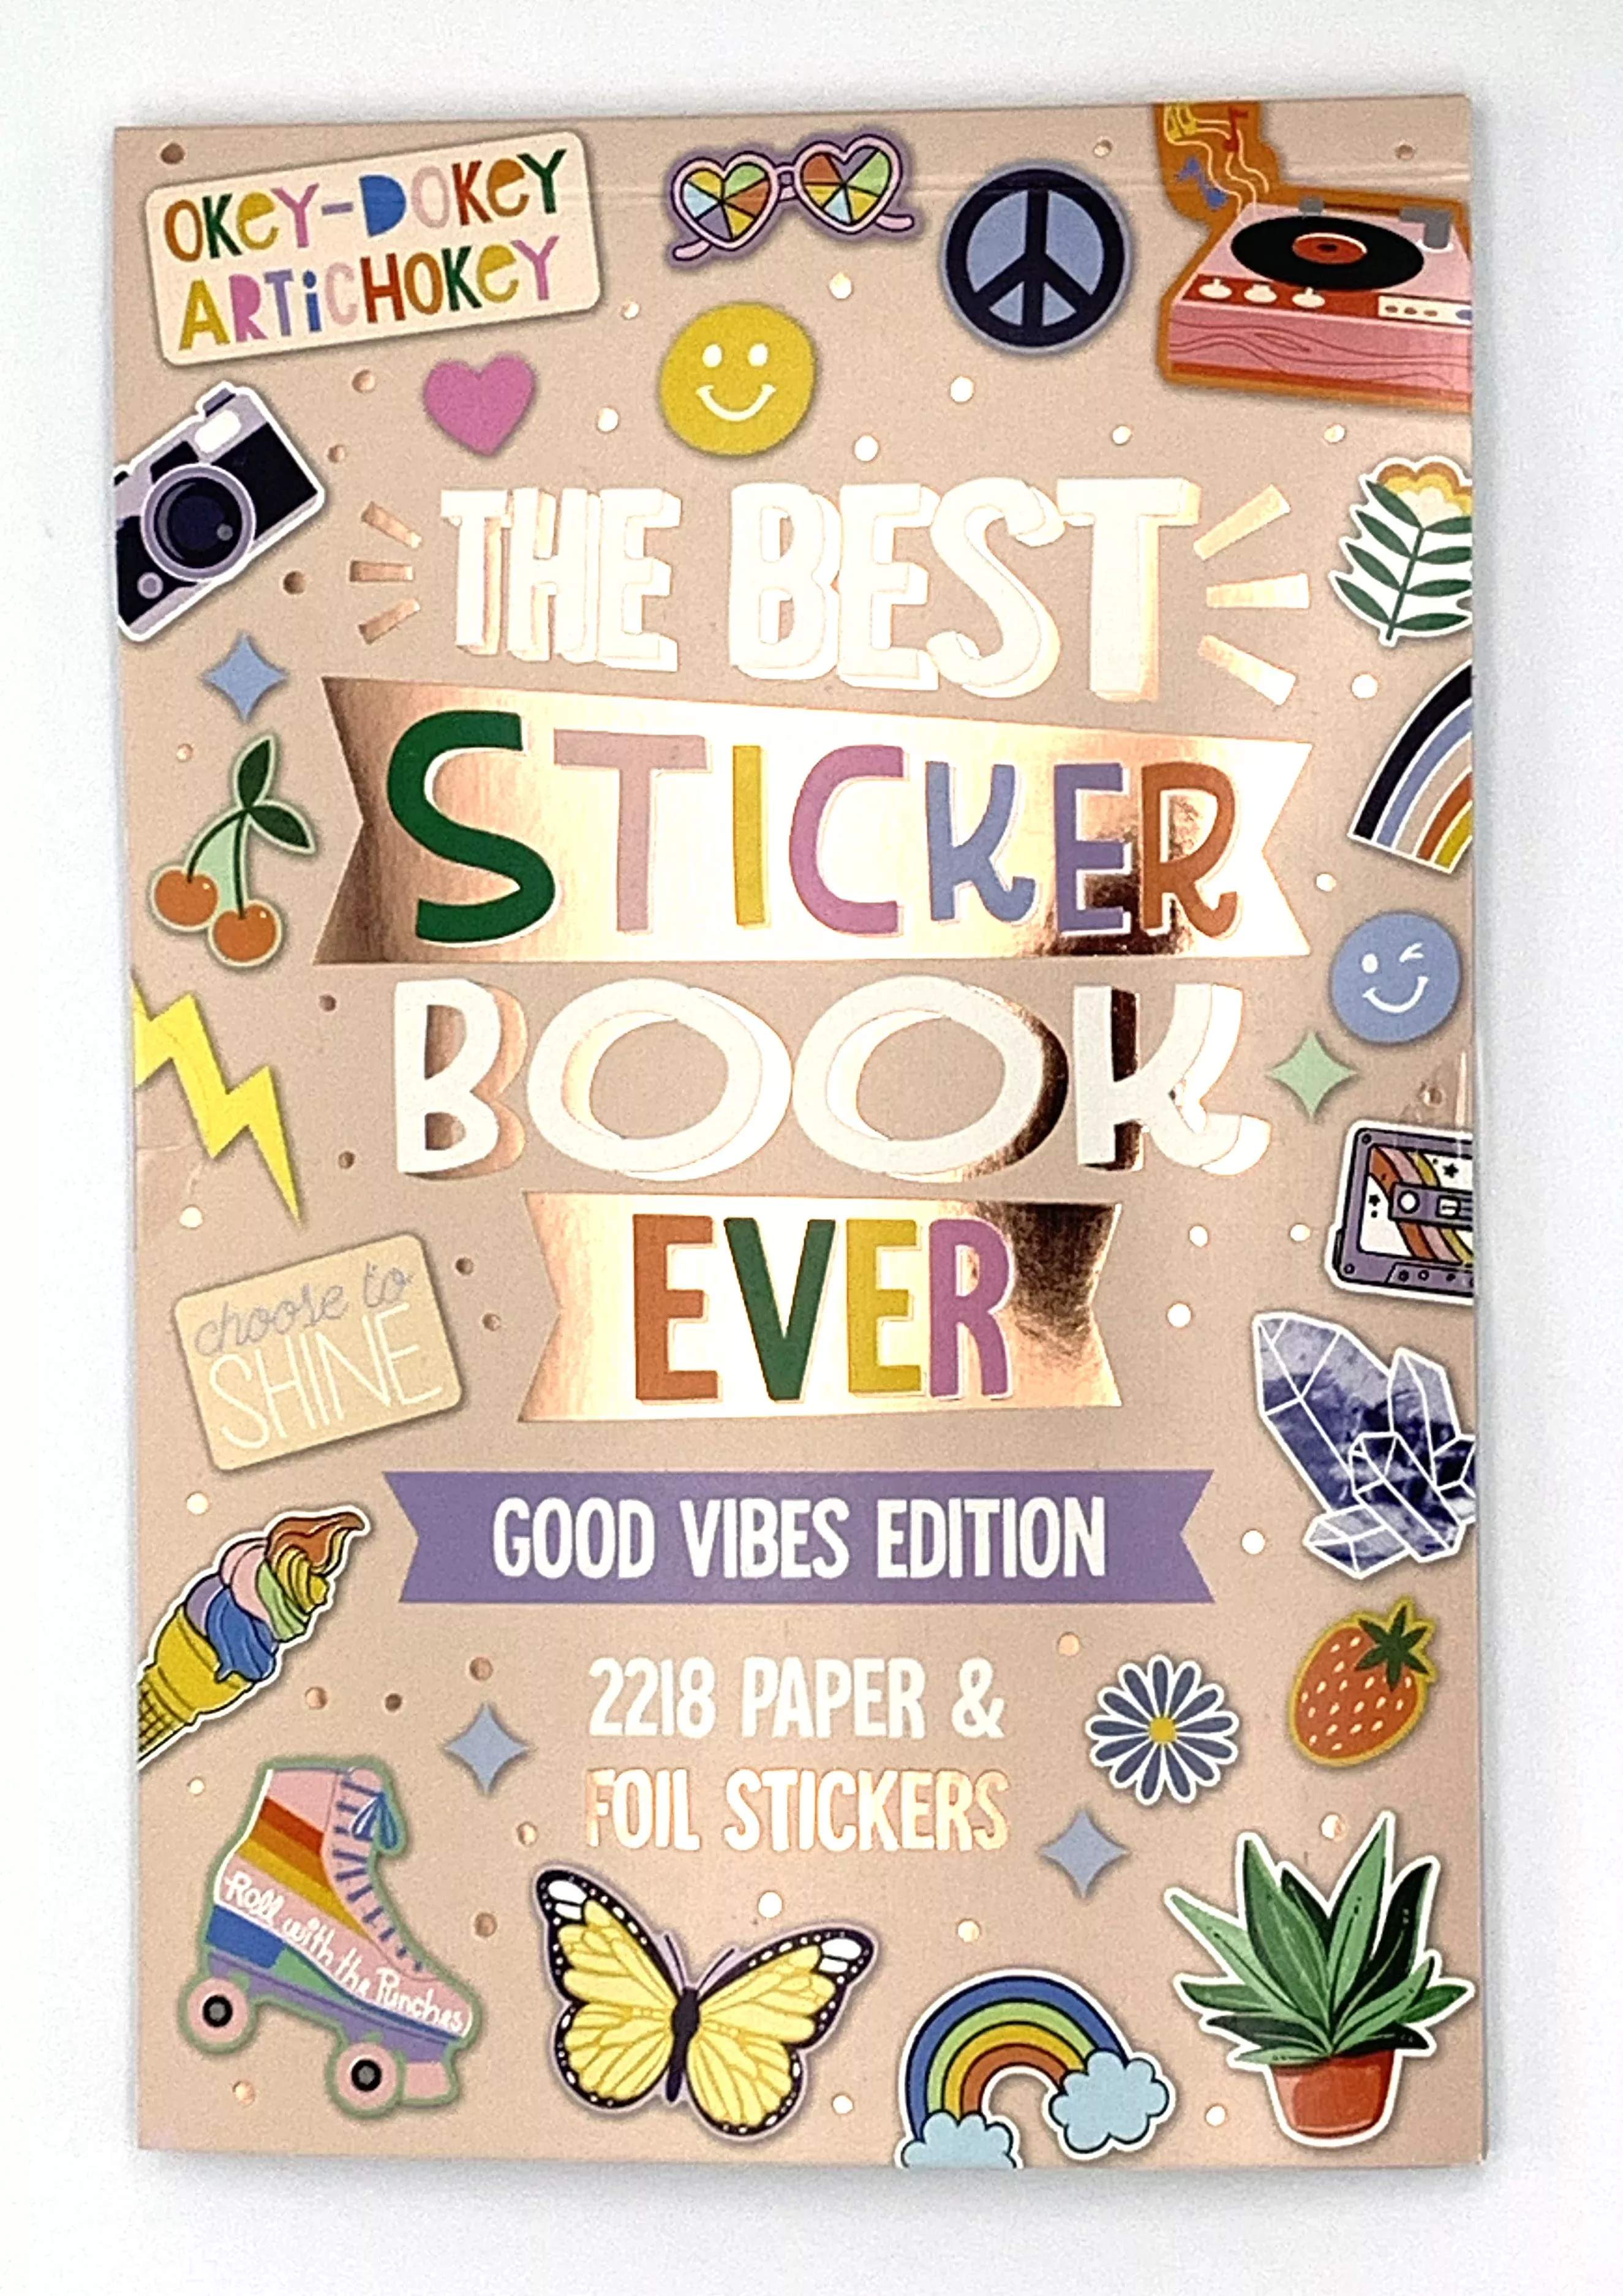 Pen+Gear Awesome Sticker Book, 40 Pages, 2500+ Paper and Foil Stickers 